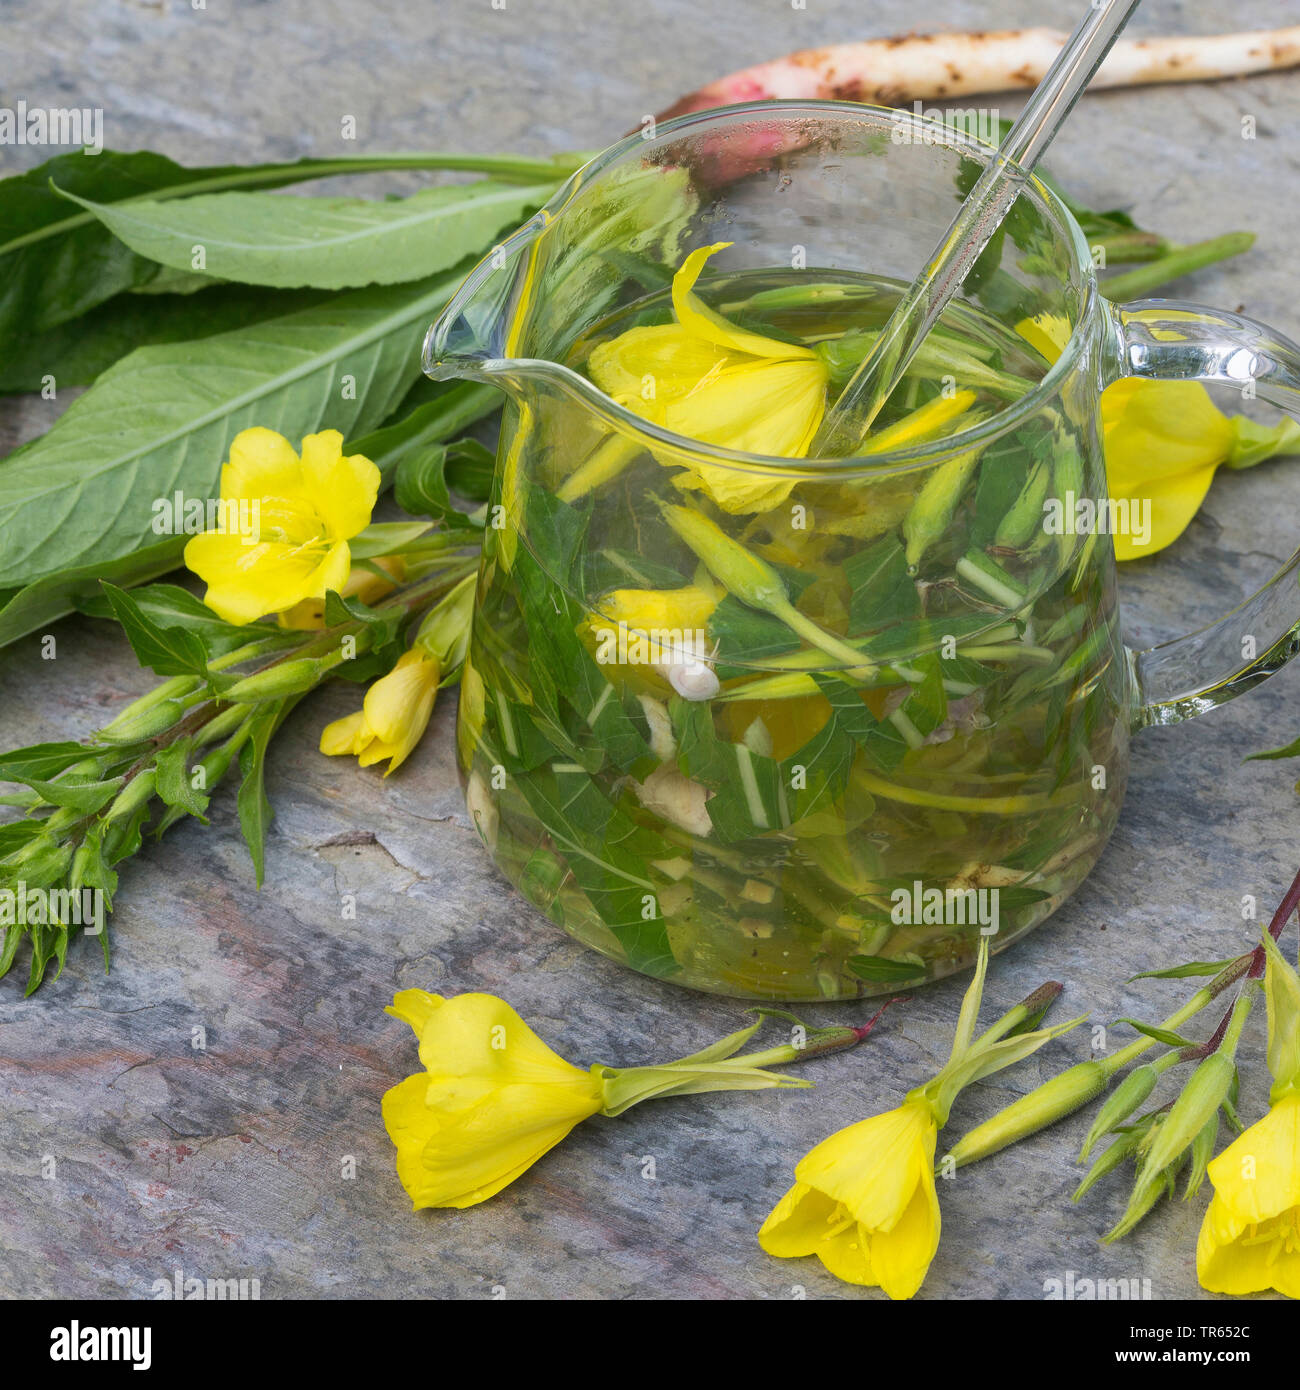 common evening primrose (Oenothera biennis), self-made evening primrose from flowers, leaves and roots, Germany Stock Photo